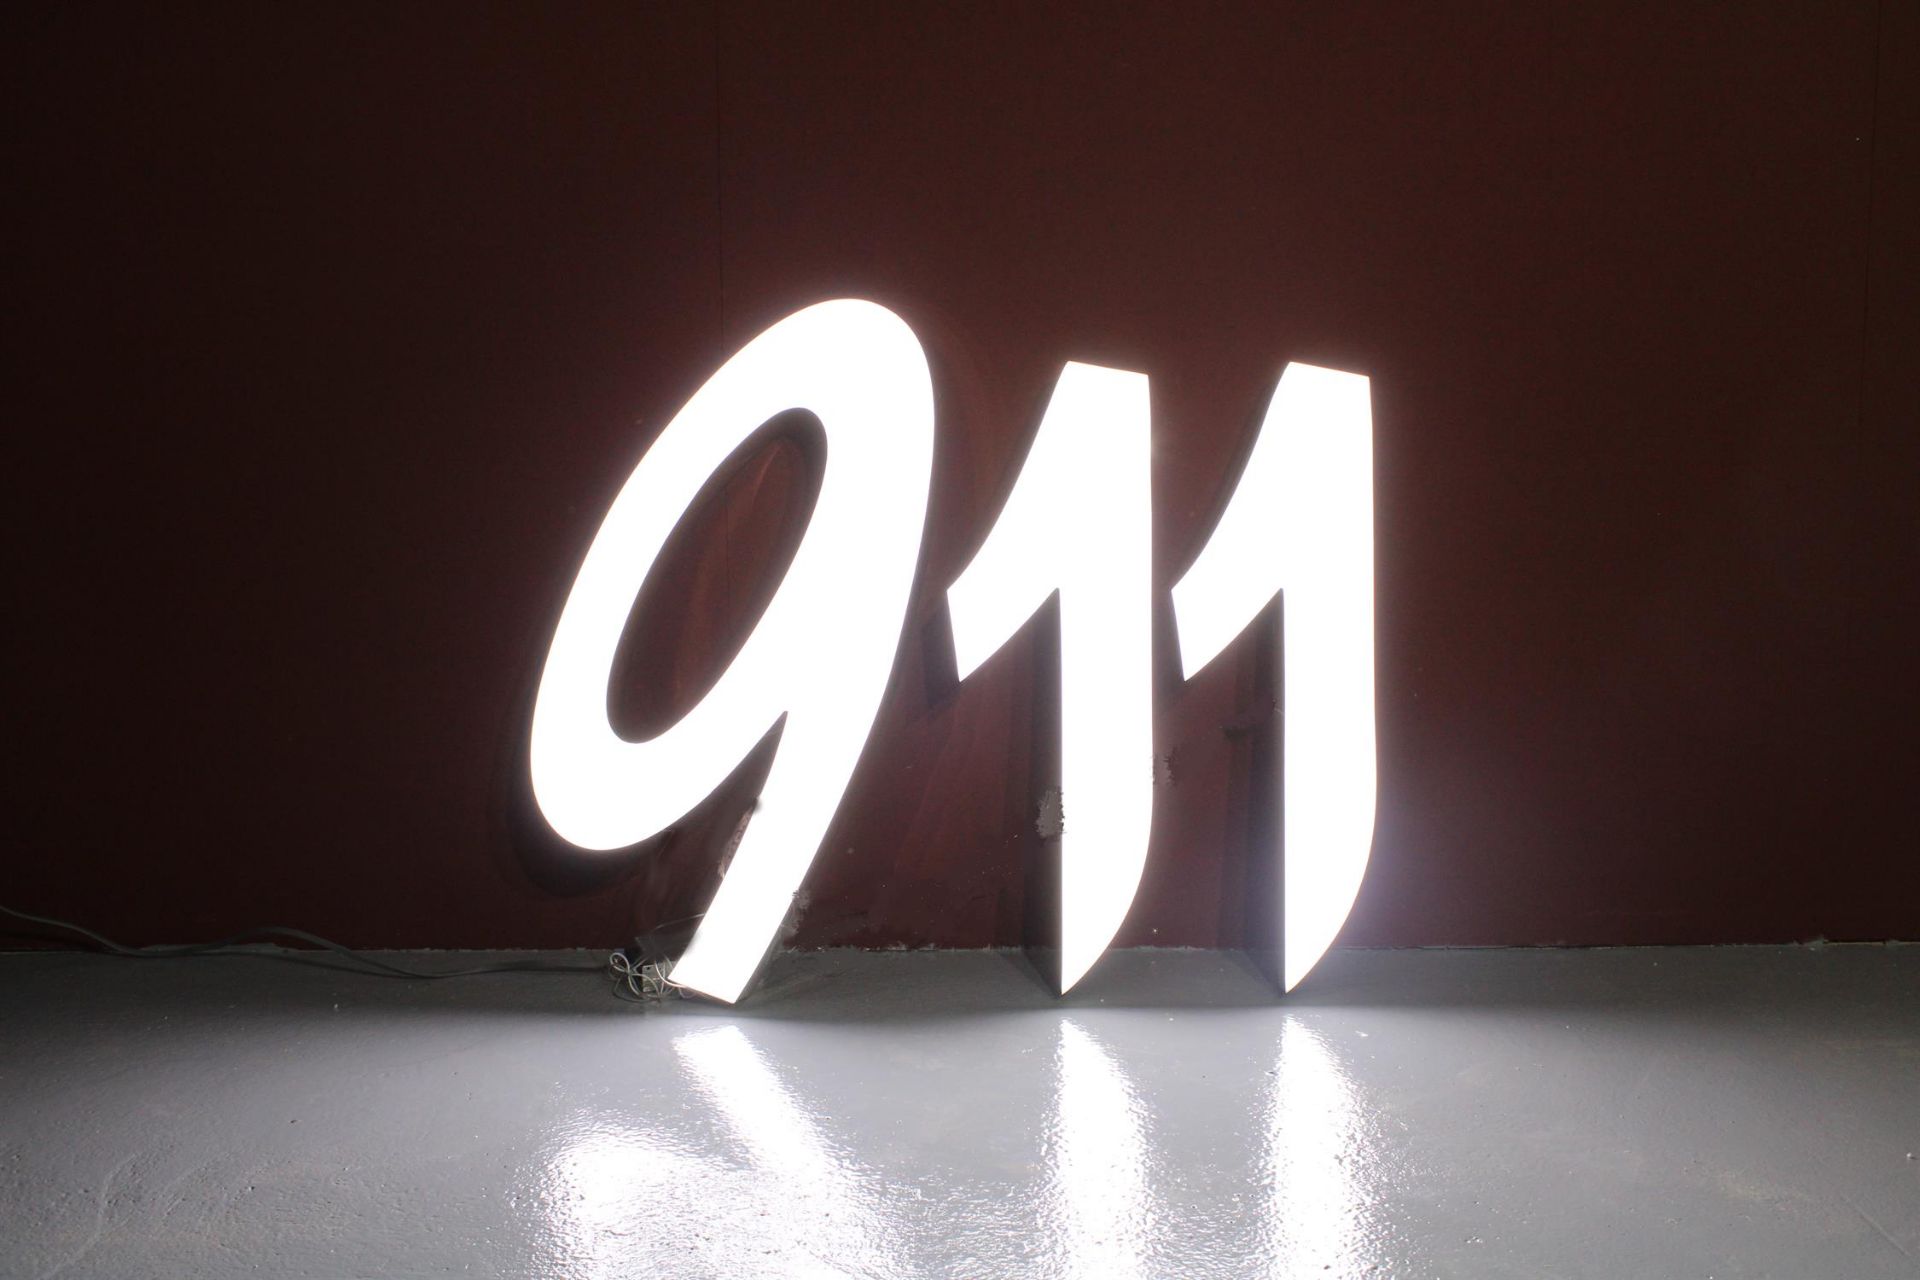 A large Illuminated Sign in the Style of the Porsche Number 911